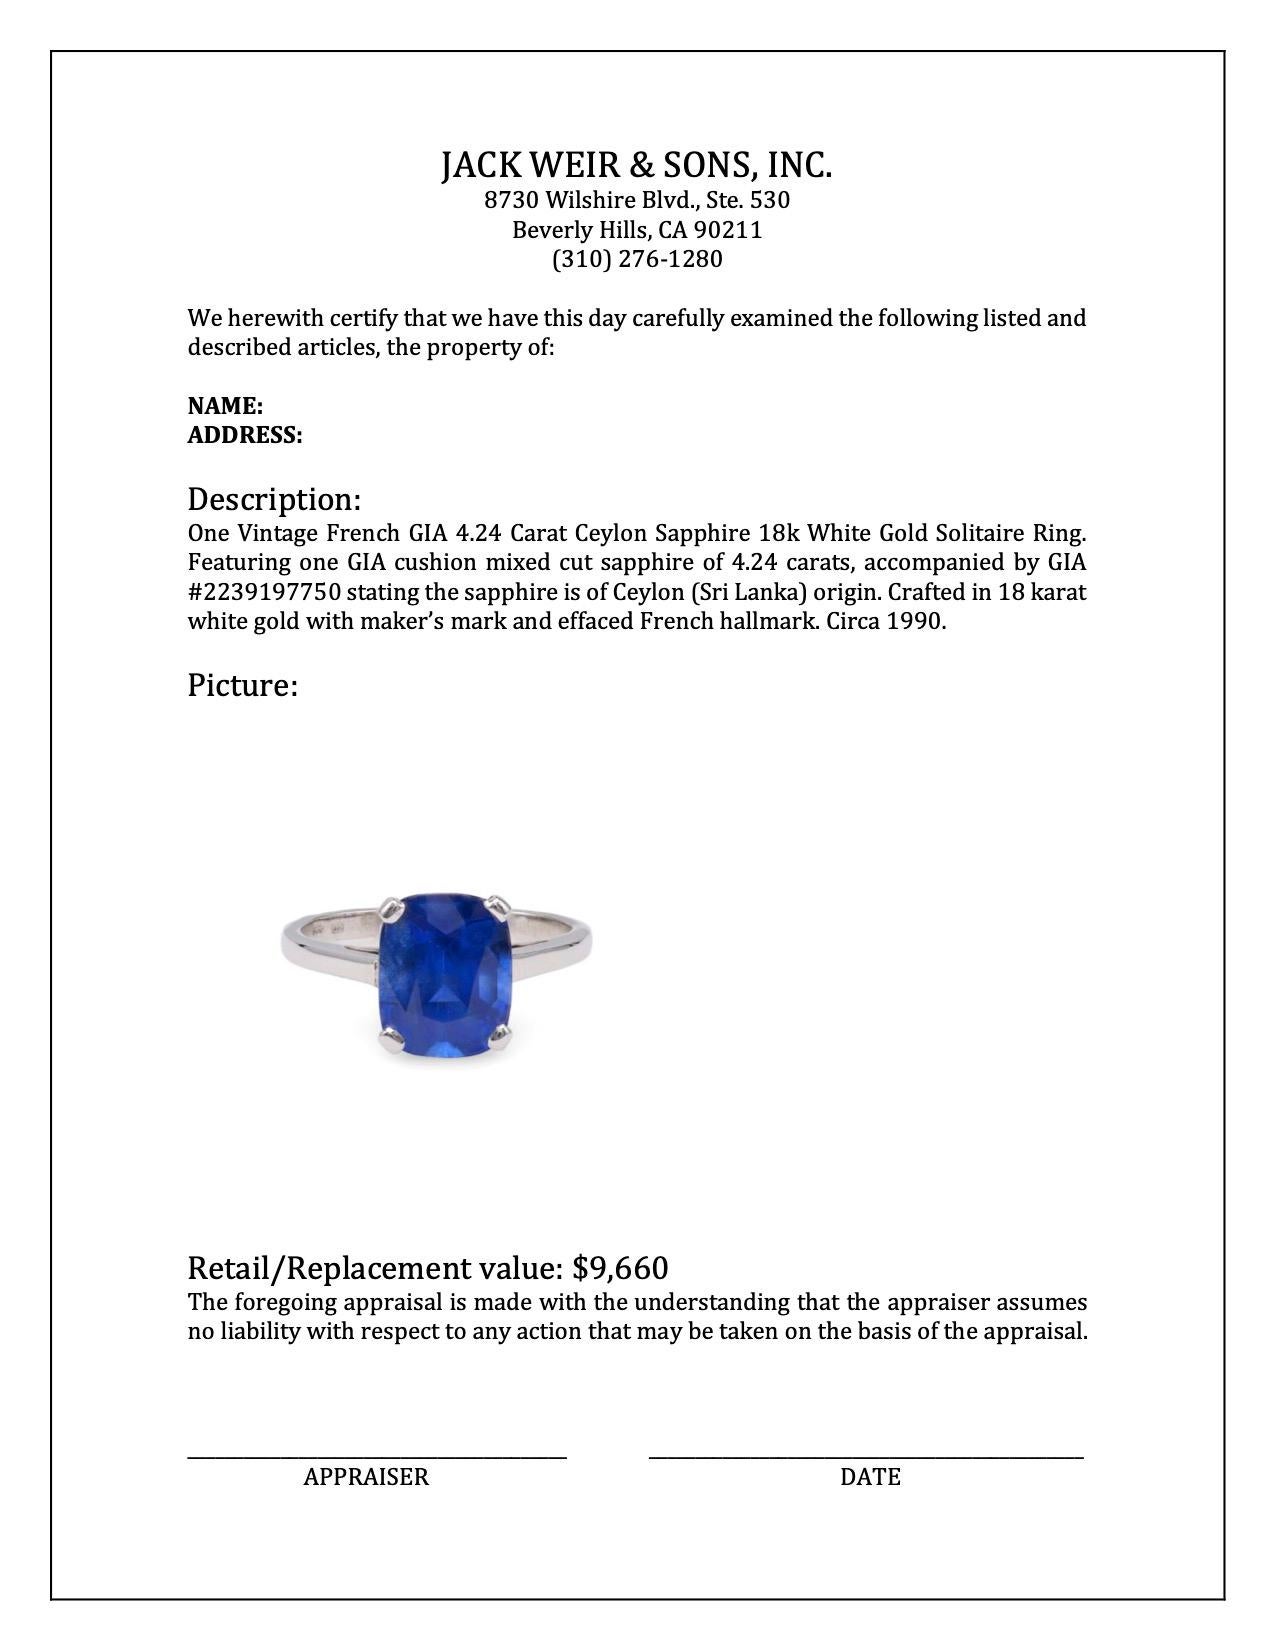 Women's or Men's Vintage French GIA 4.24 Carat Ceylon Sapphire 18k White Gold Solitaire Ring For Sale